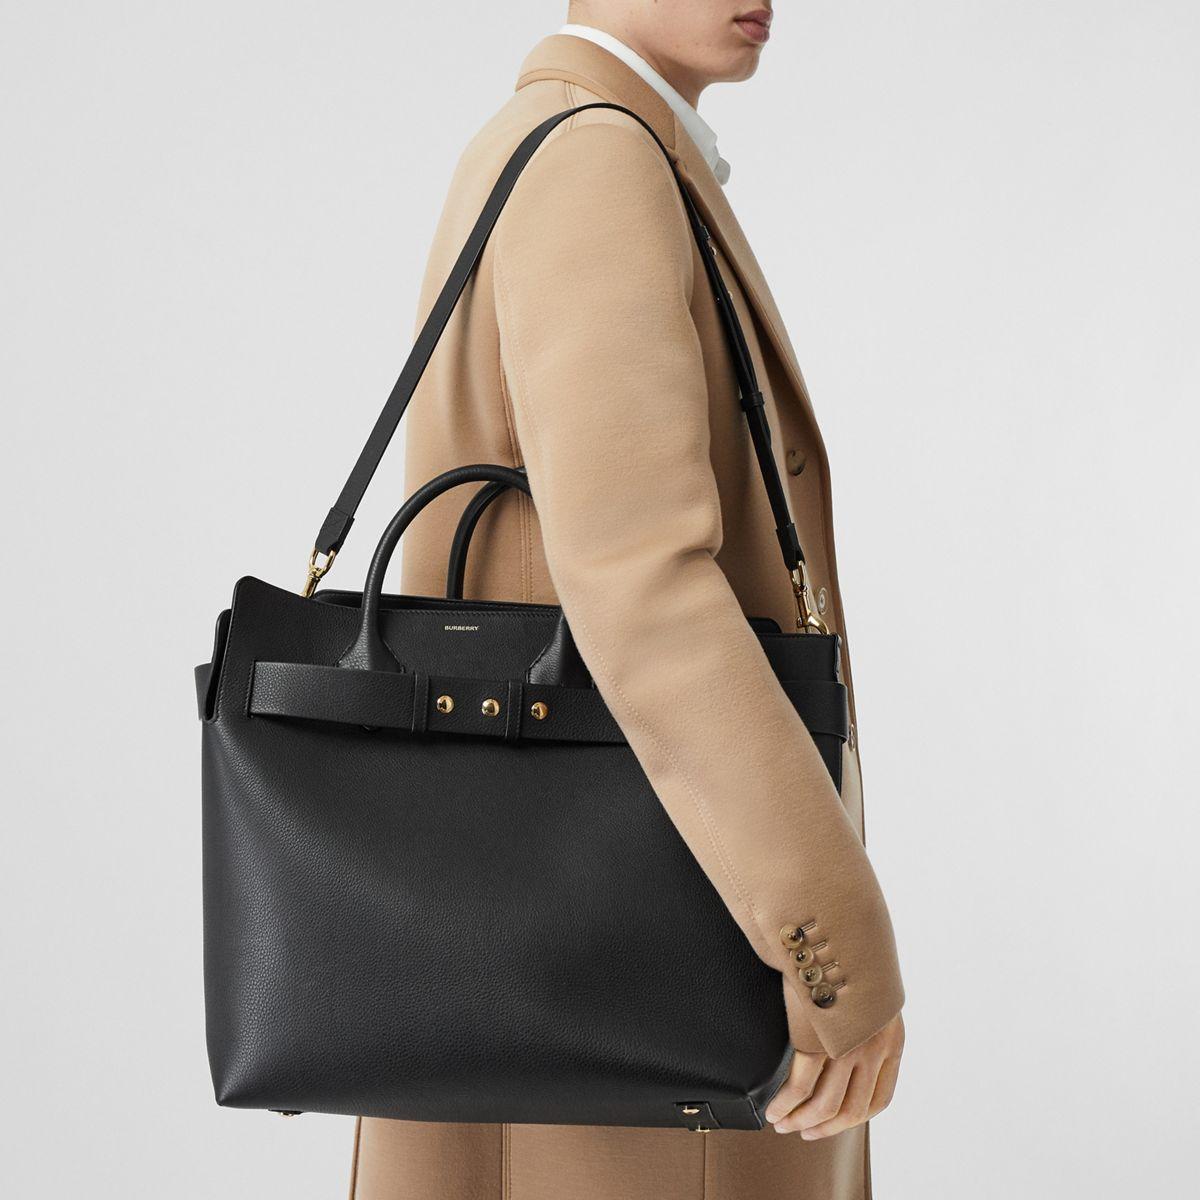 Burberry The Large Leather Triple Stud Belt Bag in Black - Lyst